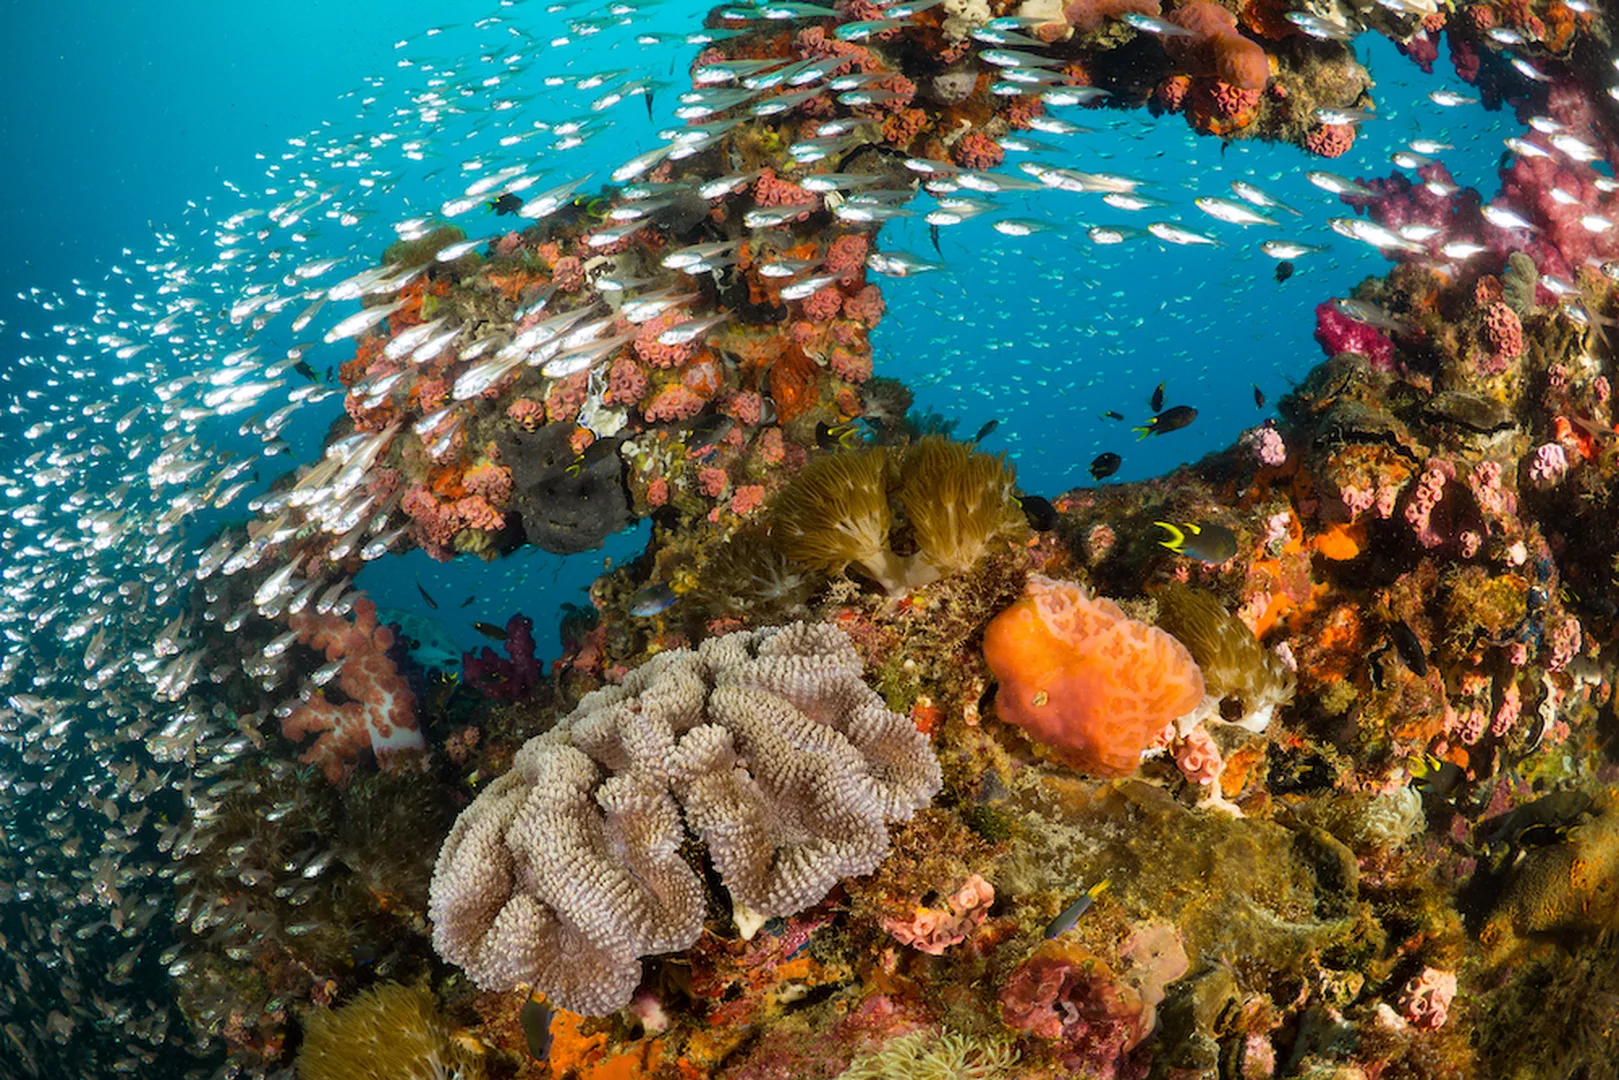 Beautiful reef photo with vibrant colored marine life